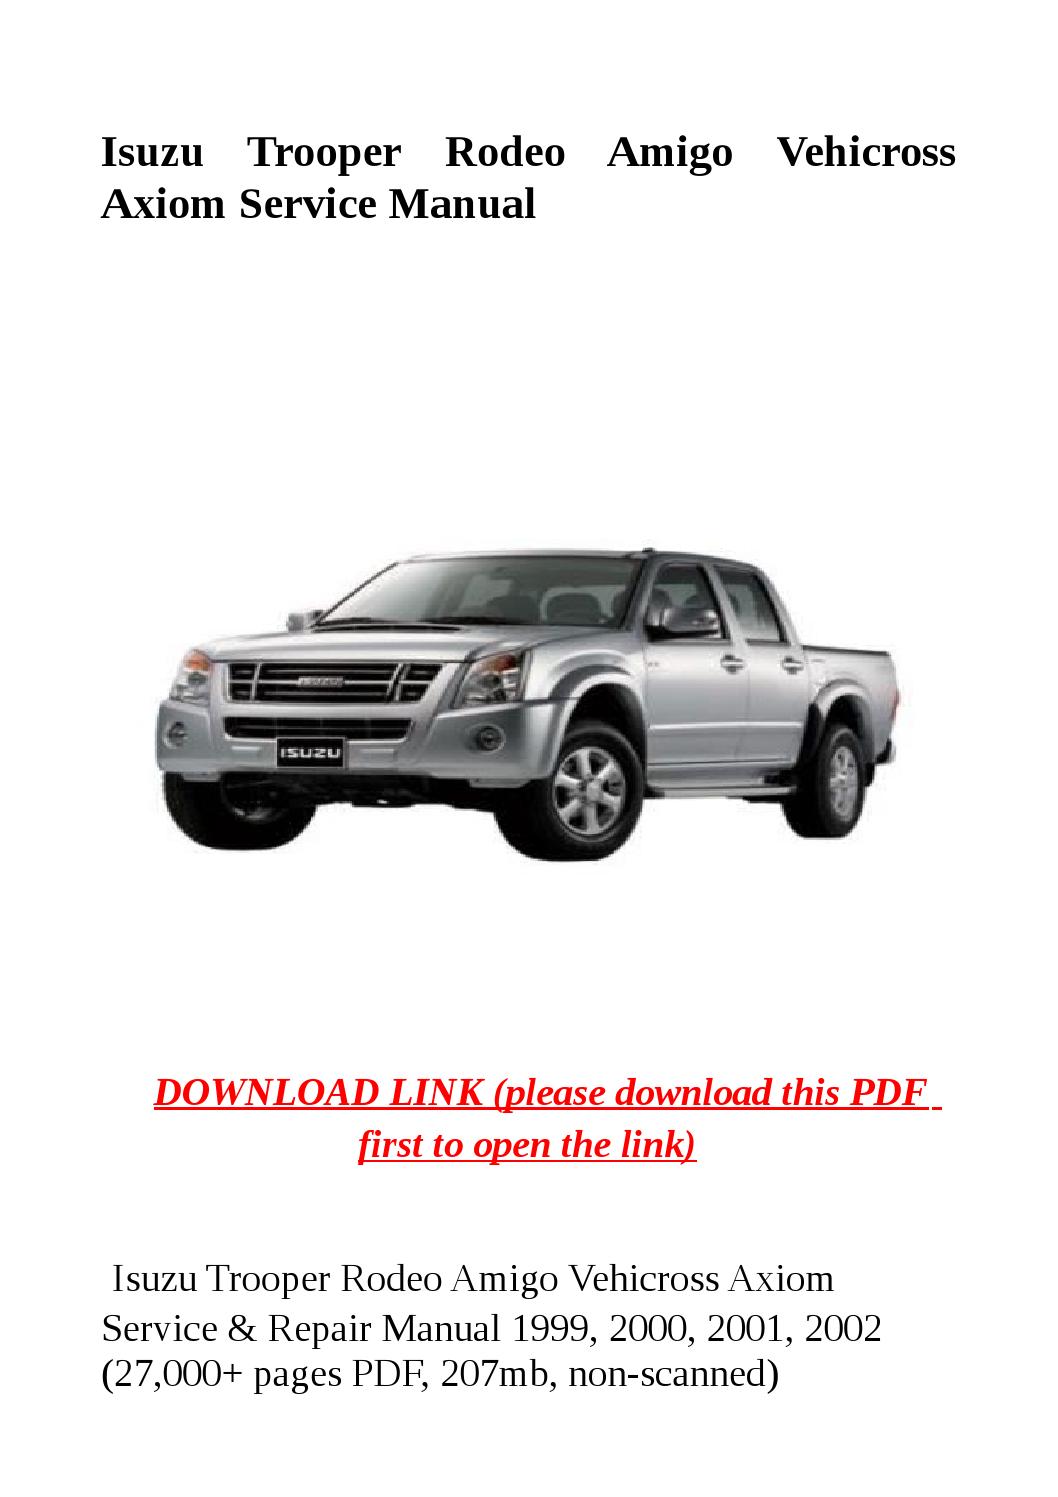 Isuzu Rodeo Owners Manual Download